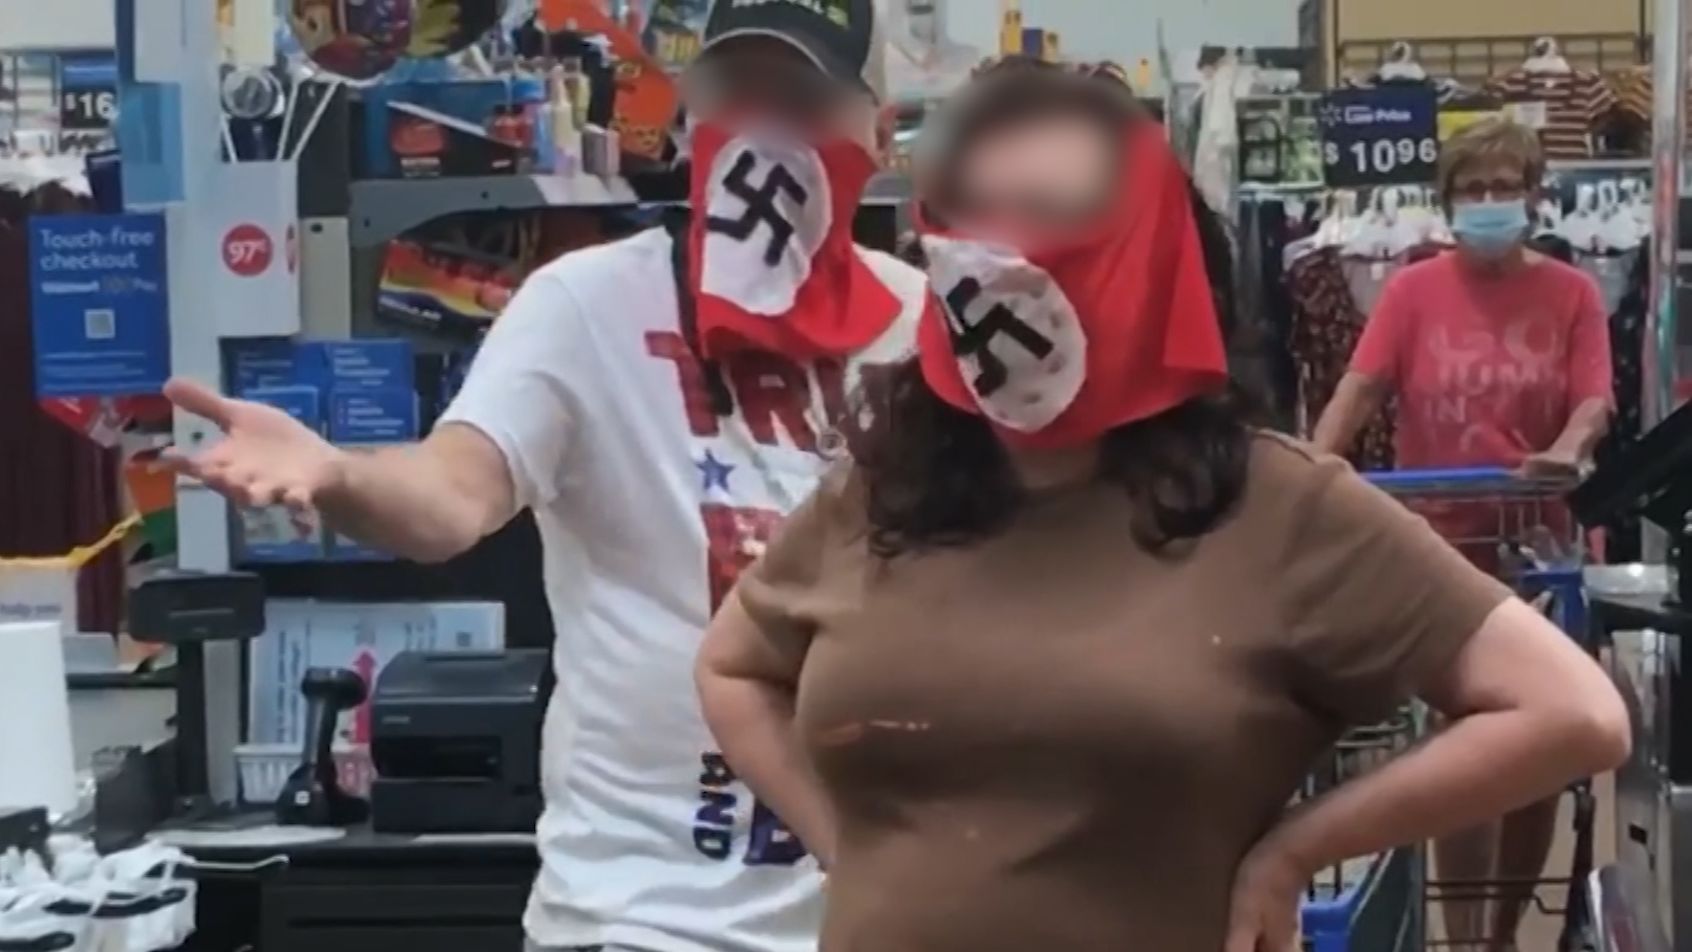 A couple has been banned from a Walmart after wearing swastika masks.